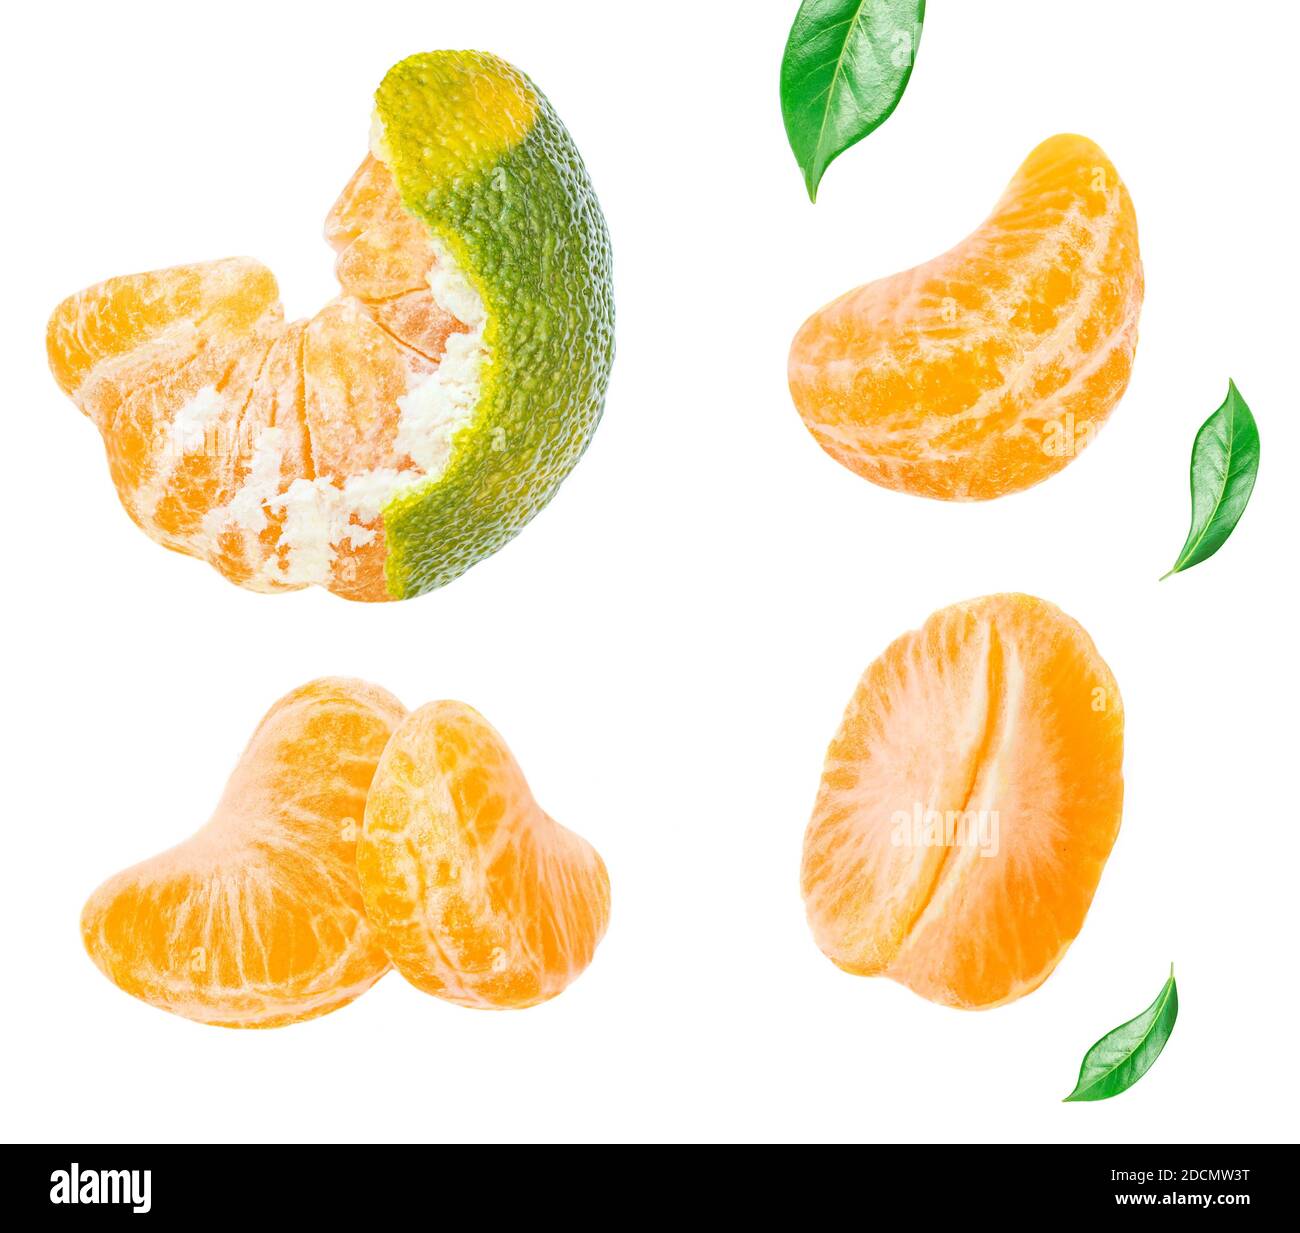 Creative layout made of Tangerines with green leaves and slices isolated on white background. Mandarines, clementine fruit Top view. Flat lay Stock Photo